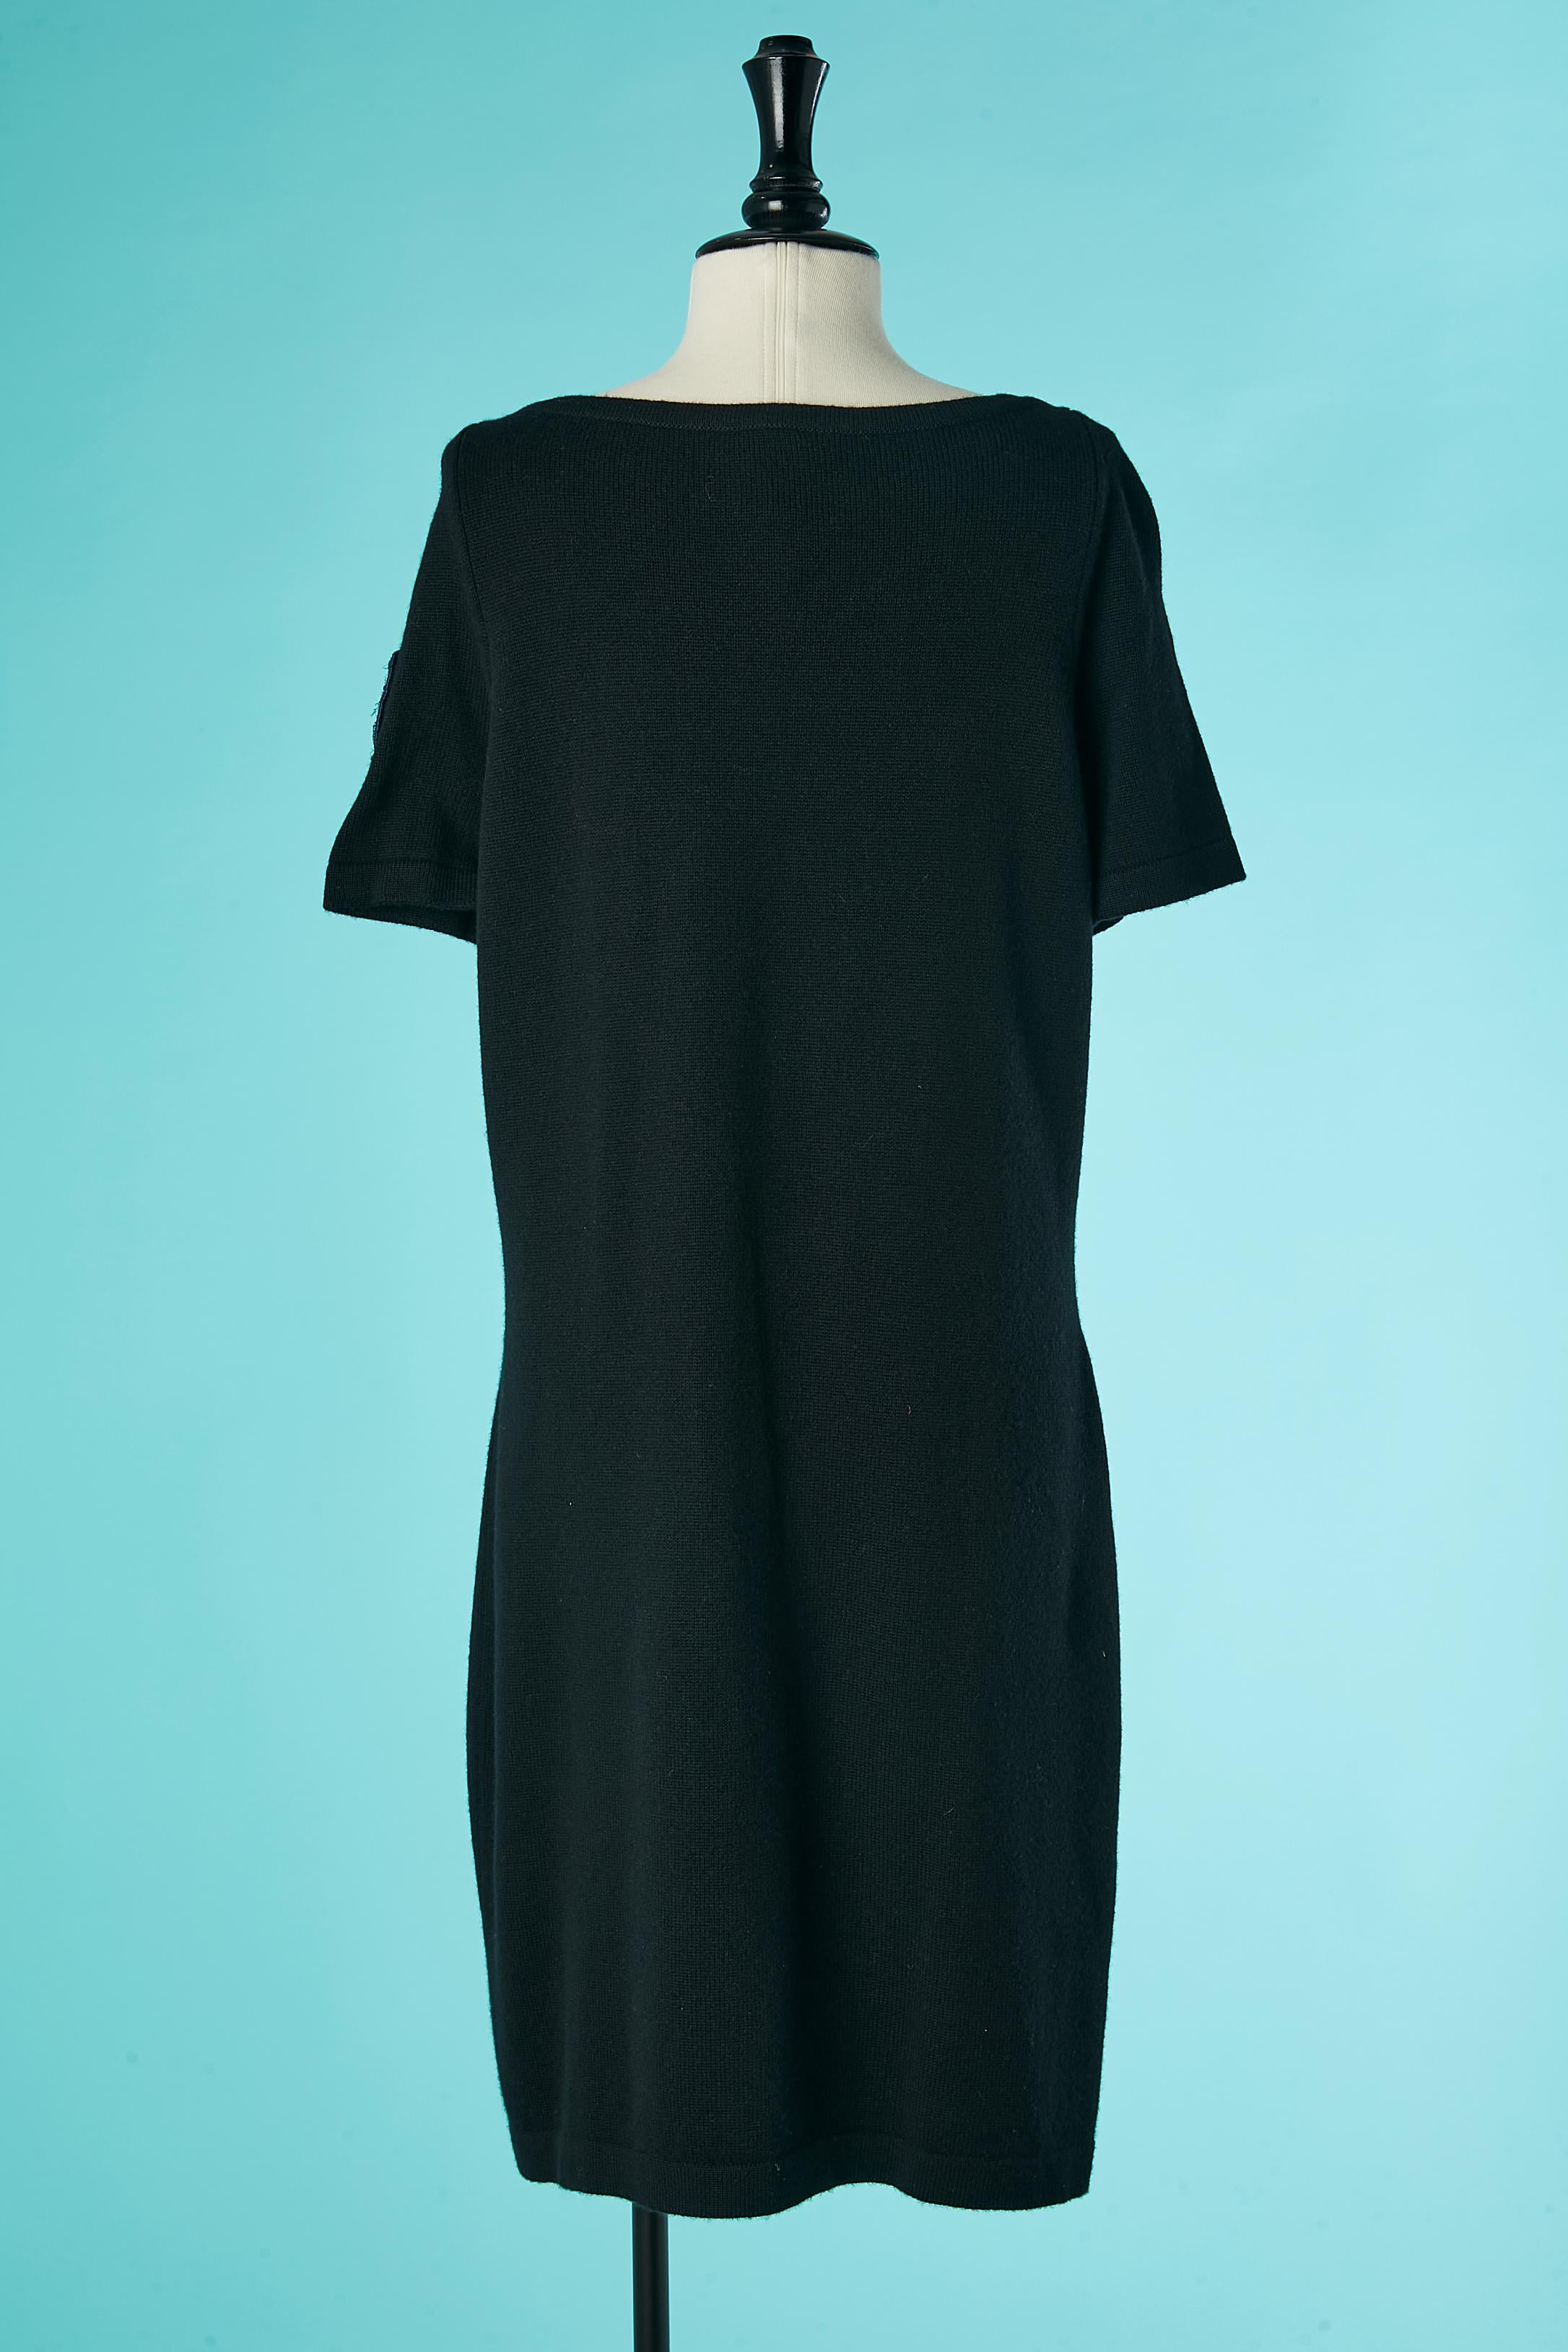 Black cashmere knit dress with short sleeves and clover brooches Chanel  For Sale 2